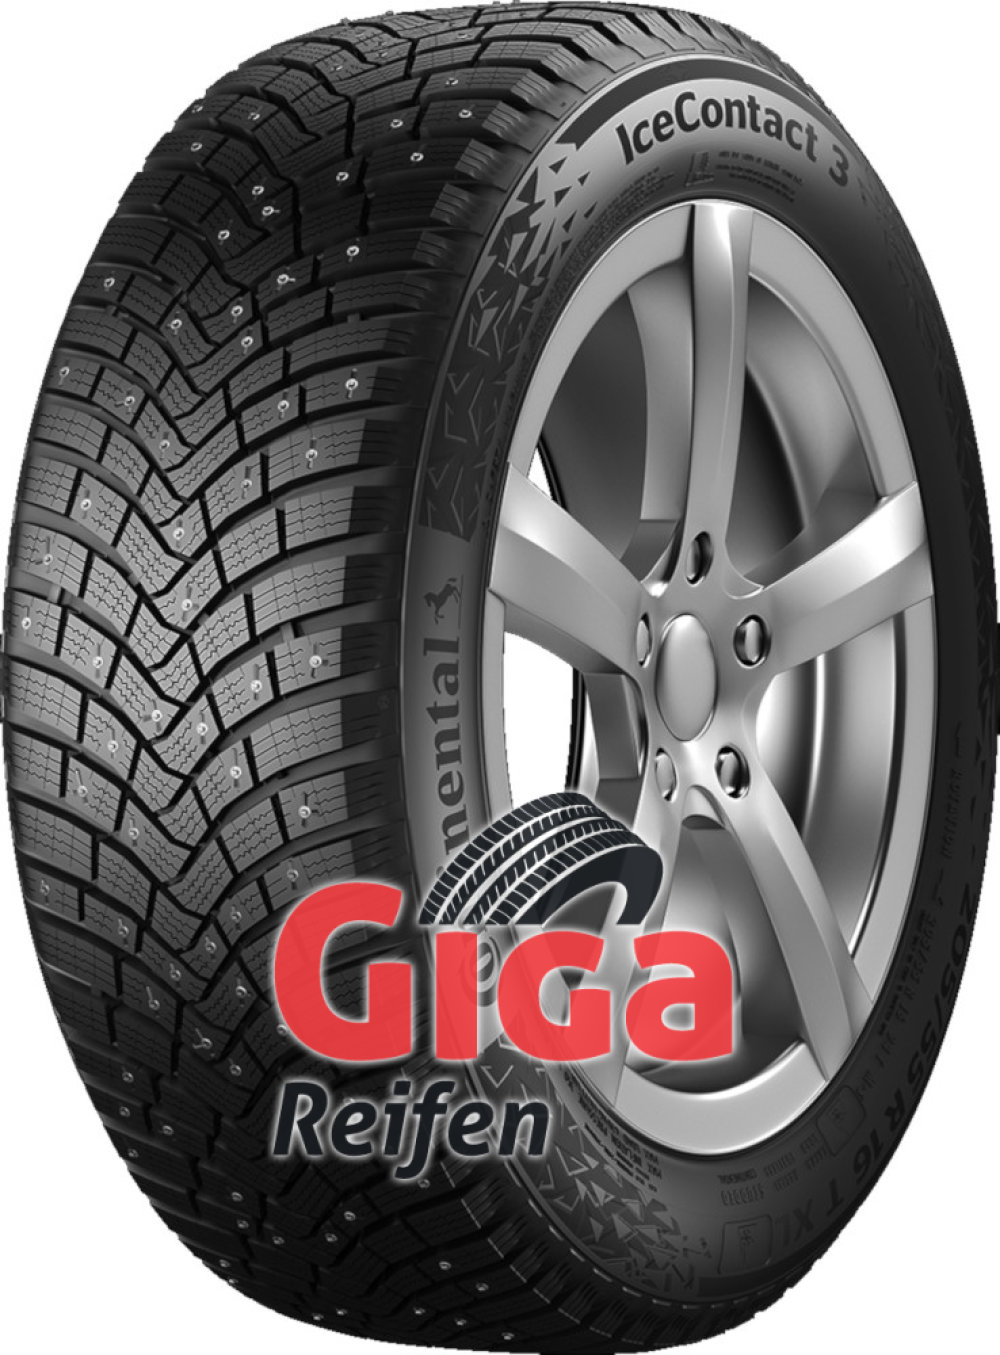 Continental IceContact 3 ( 235/45 R18 98T XL, bespiked ) von Continental